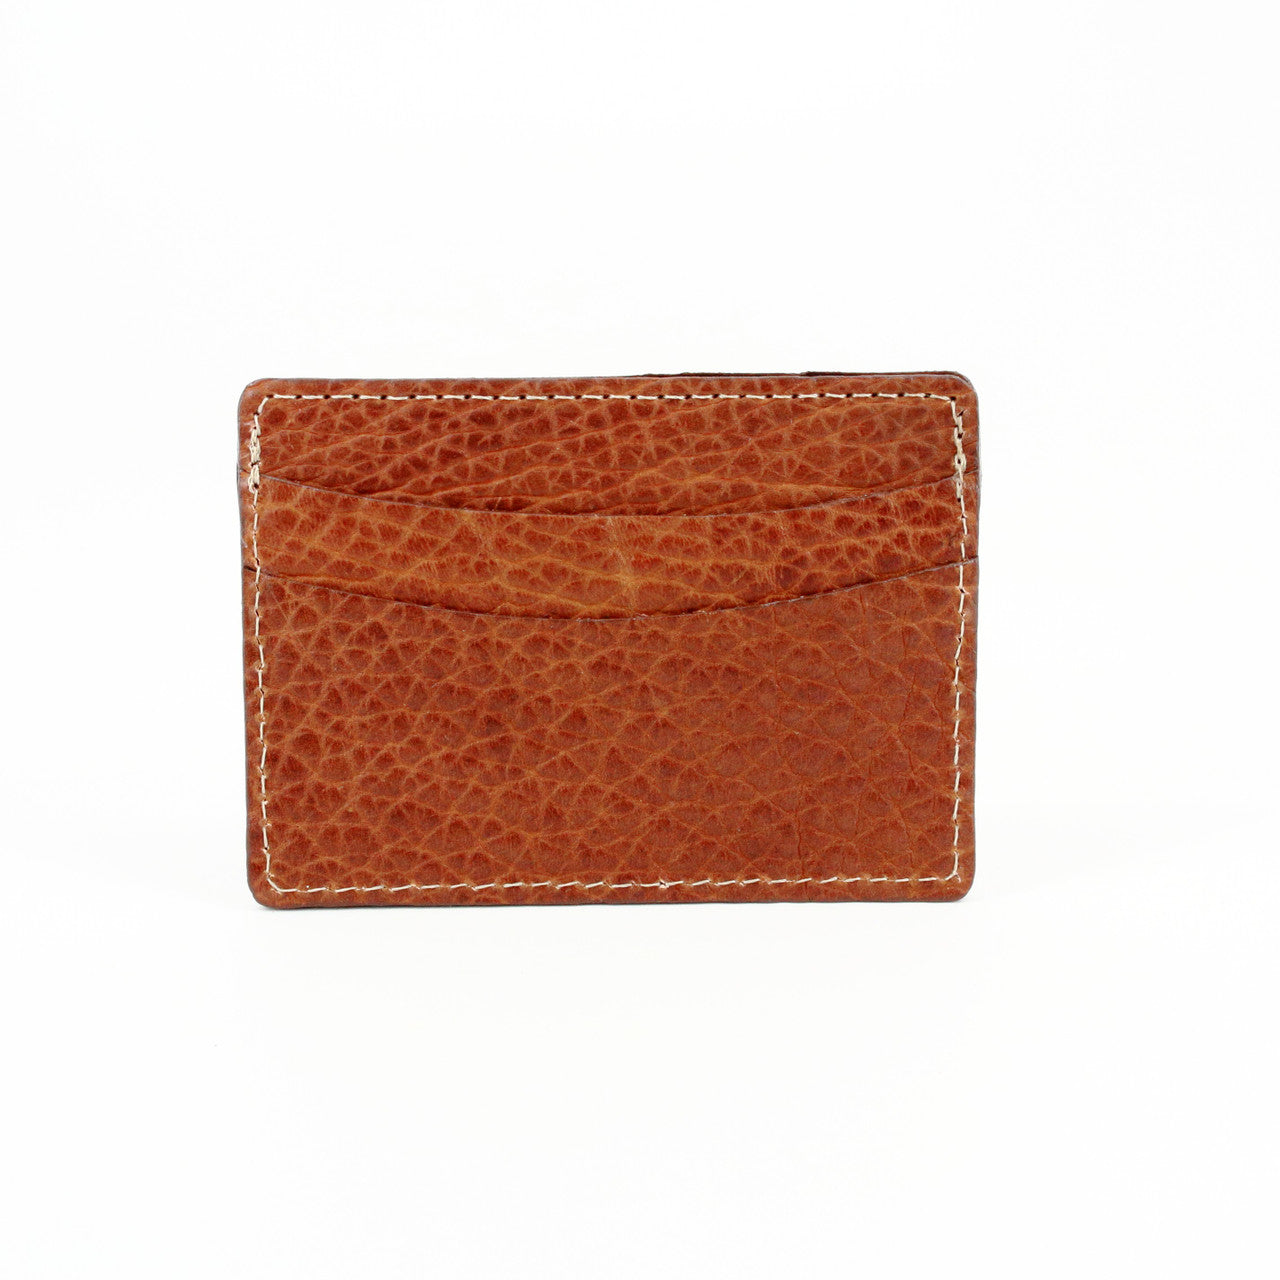 Genuine America Bison Leather Card Case in Cognac by Torino Leather